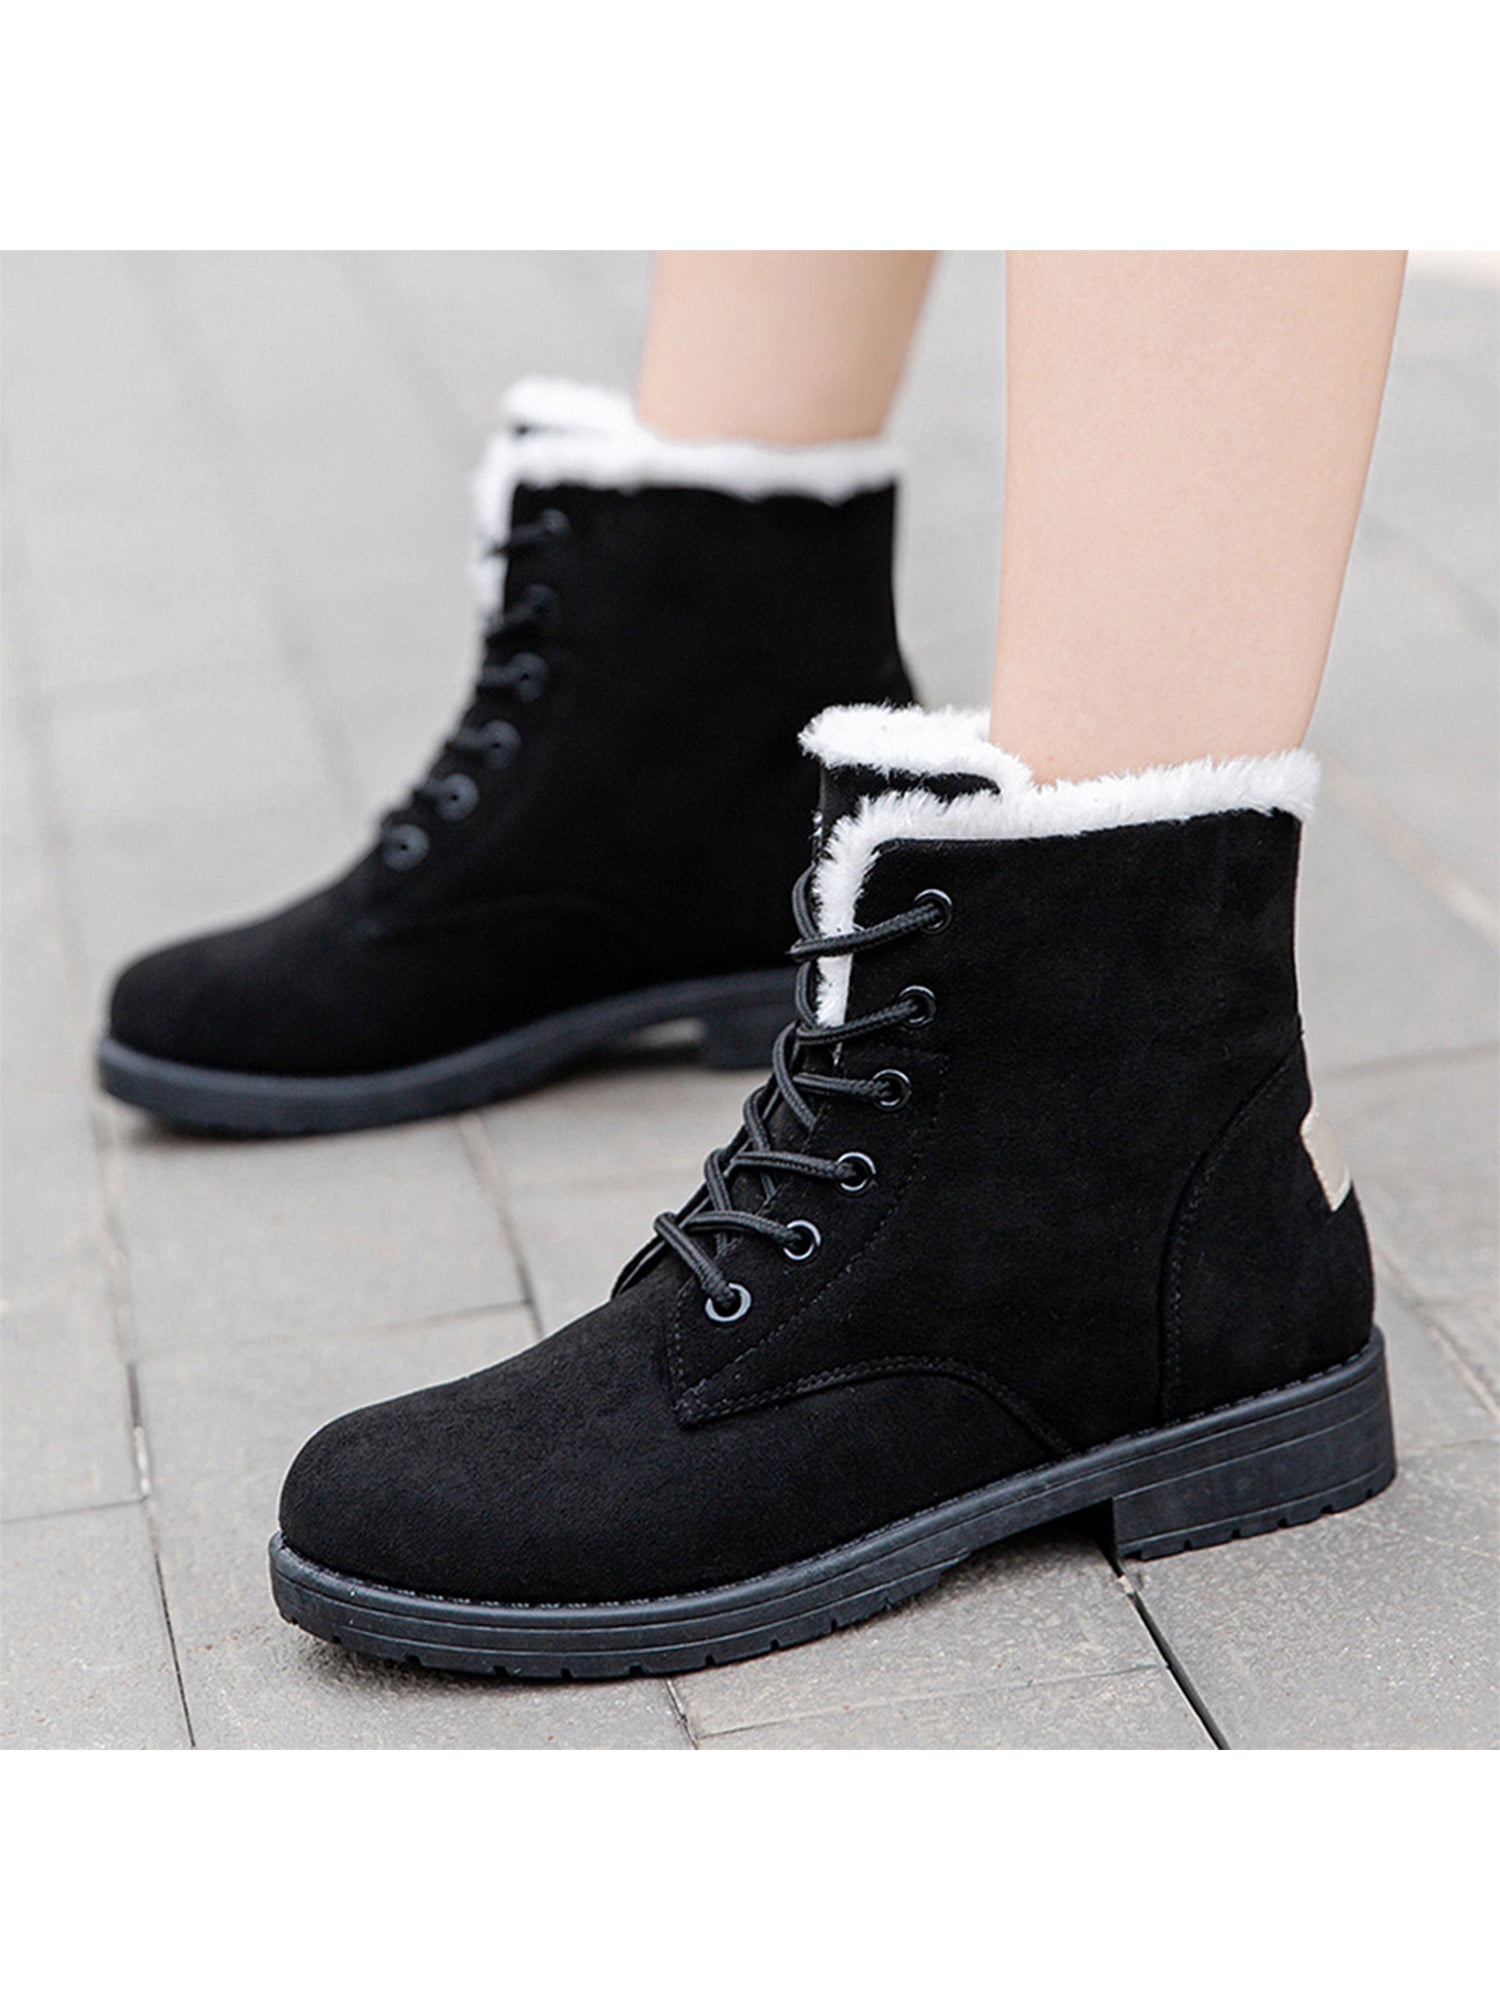 LADIES CUSHION WALK WINTER CASUAL FAUX SUEDE FUR LINED ZIP COMFORT ANKLE BOOTS